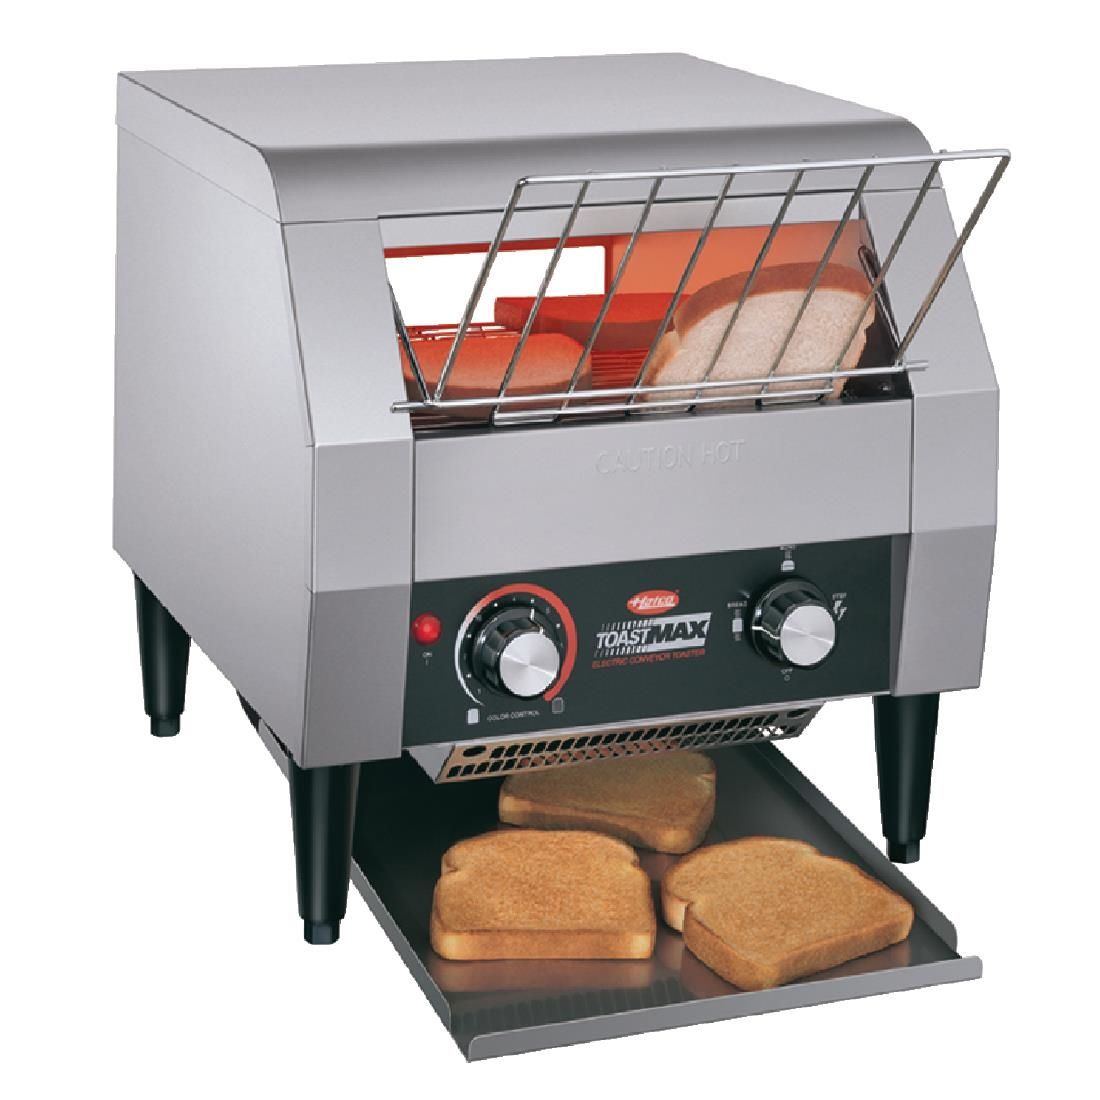 Hatco Conveyor Toaster with Double Slice Feed TM10 JD Catering Equipment Solutions Ltd